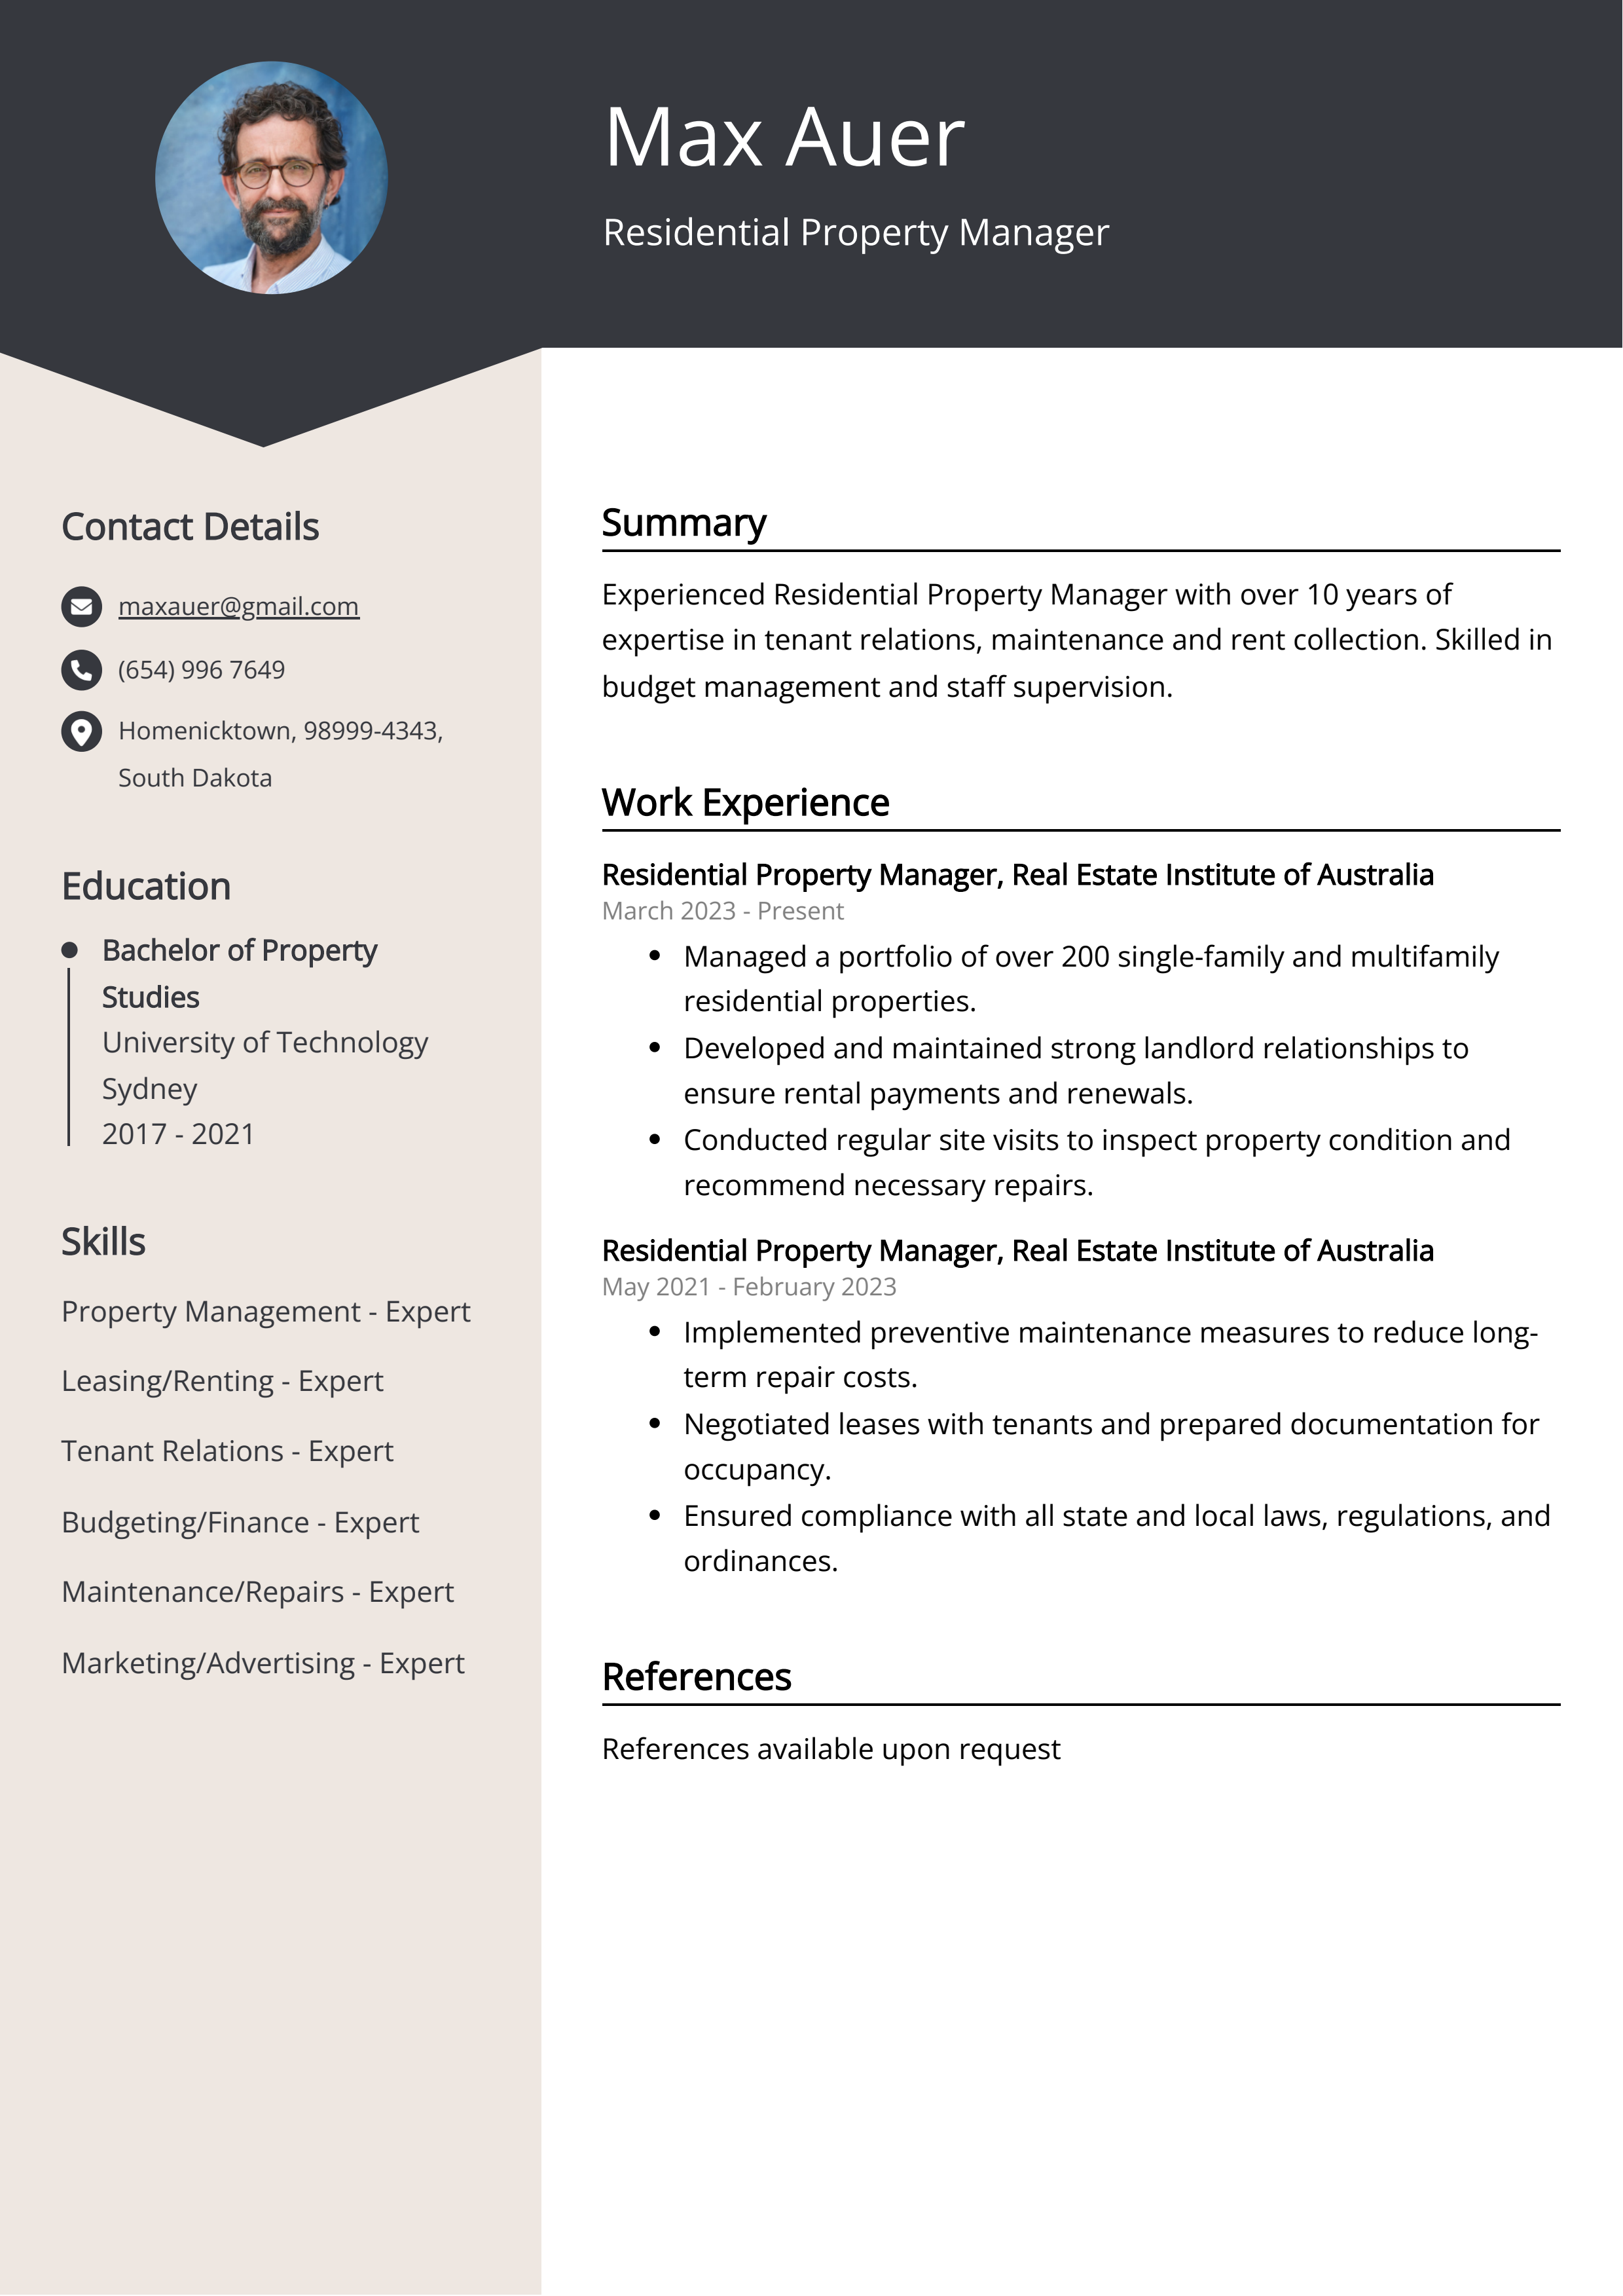 Residential Property Manager CV Example